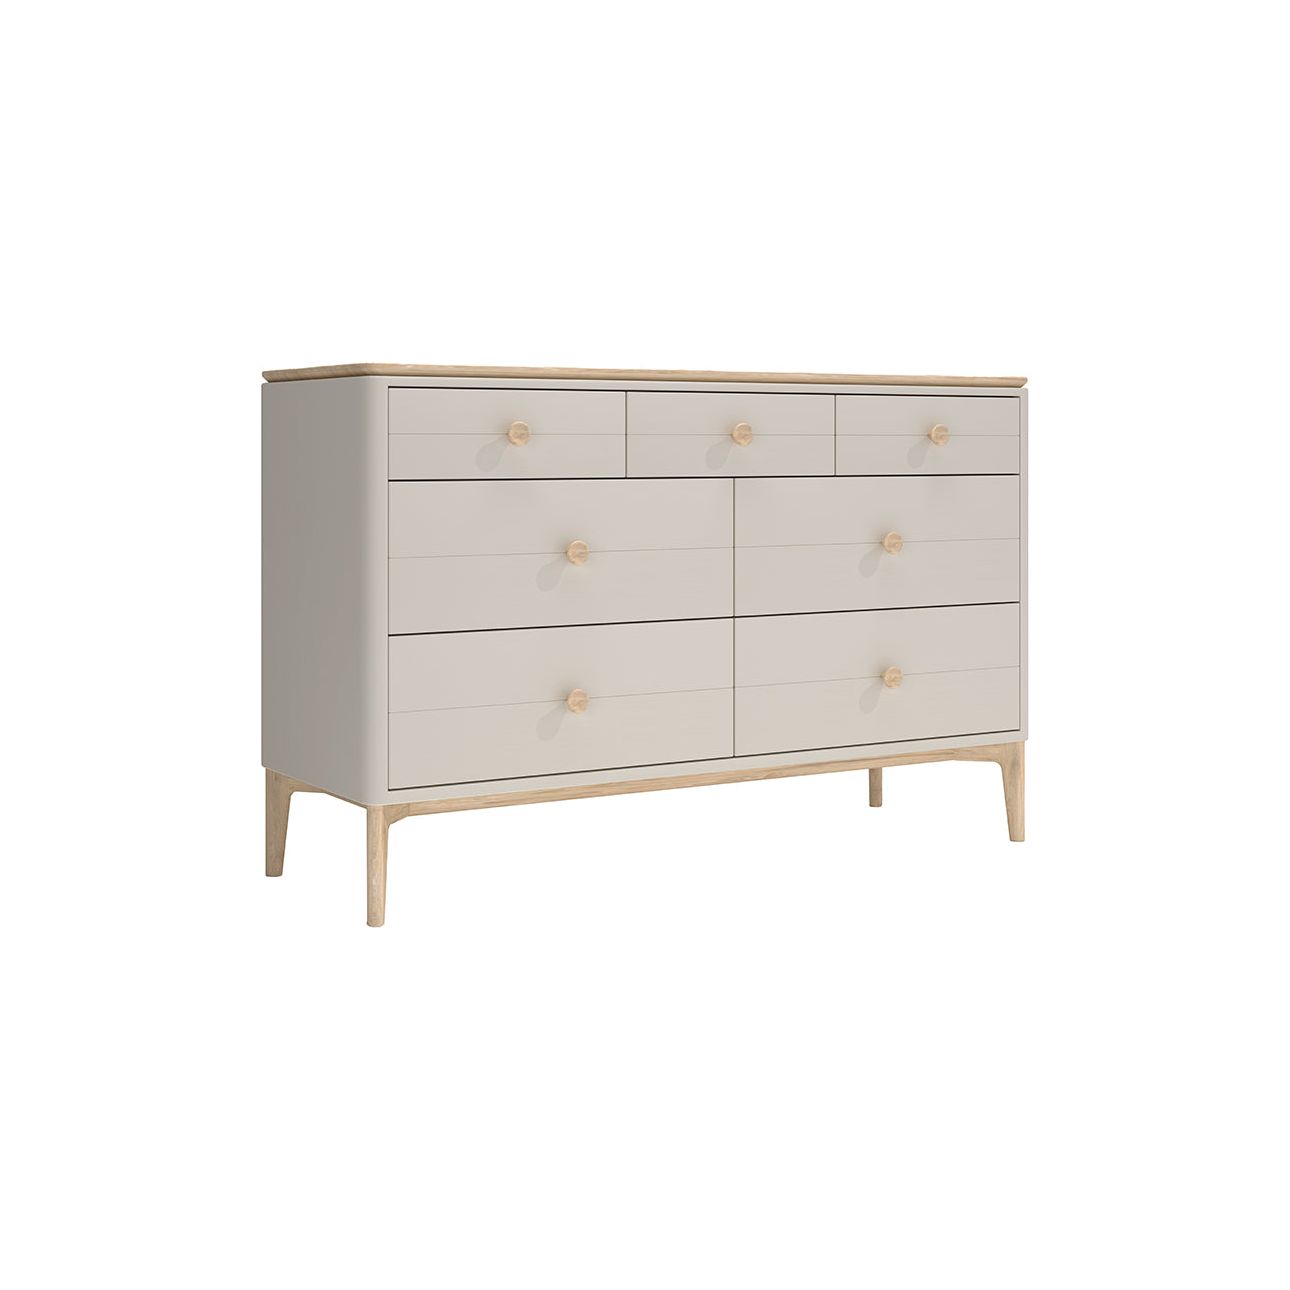 Diego -Wide Chest Of Drawers  - Cashmere Oak